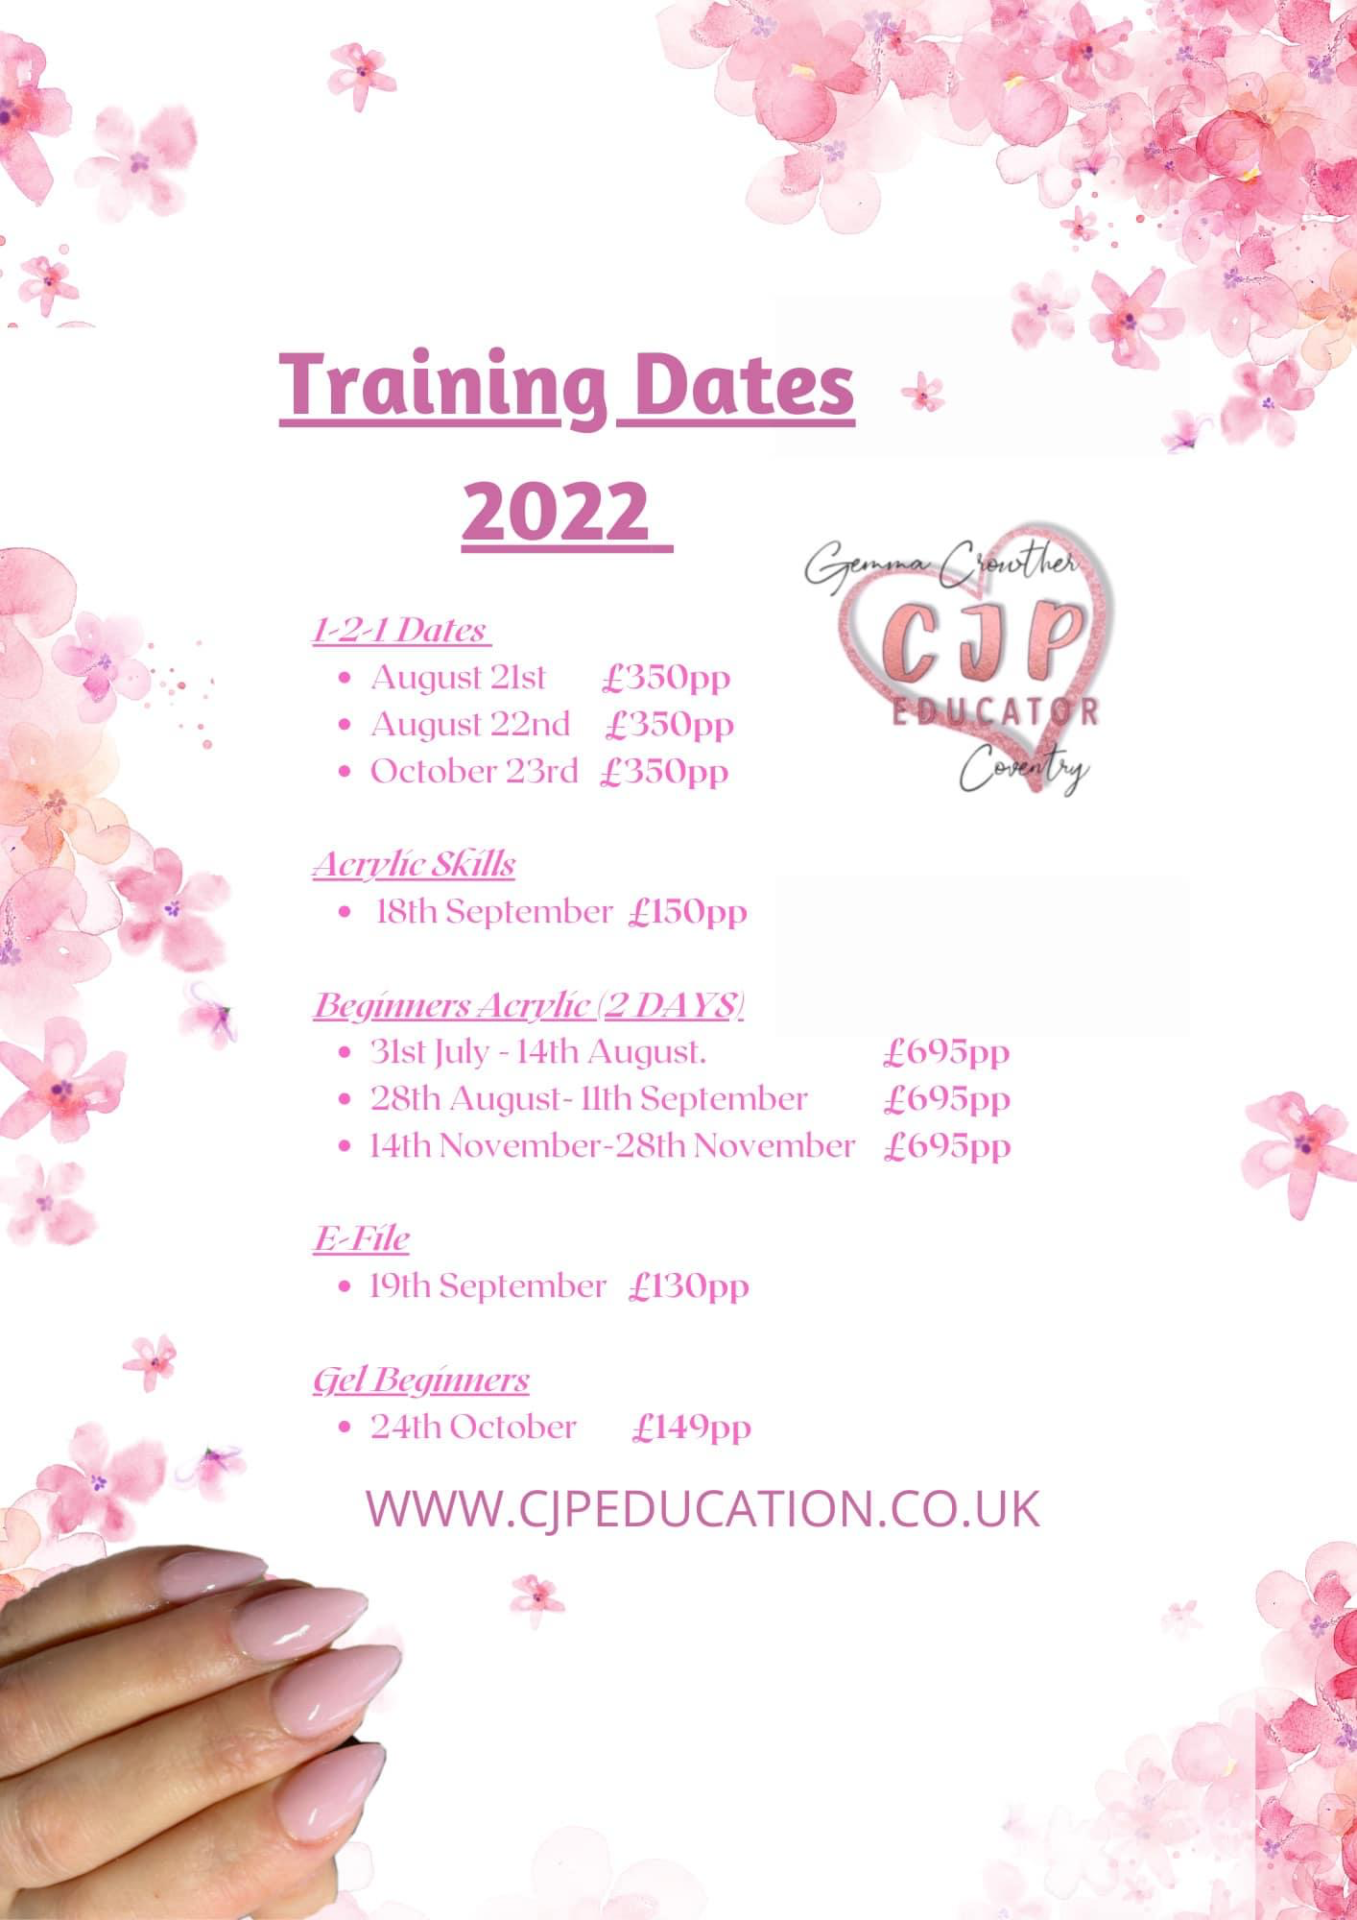 Gemma Crowther Nail Training Course Dates 2022